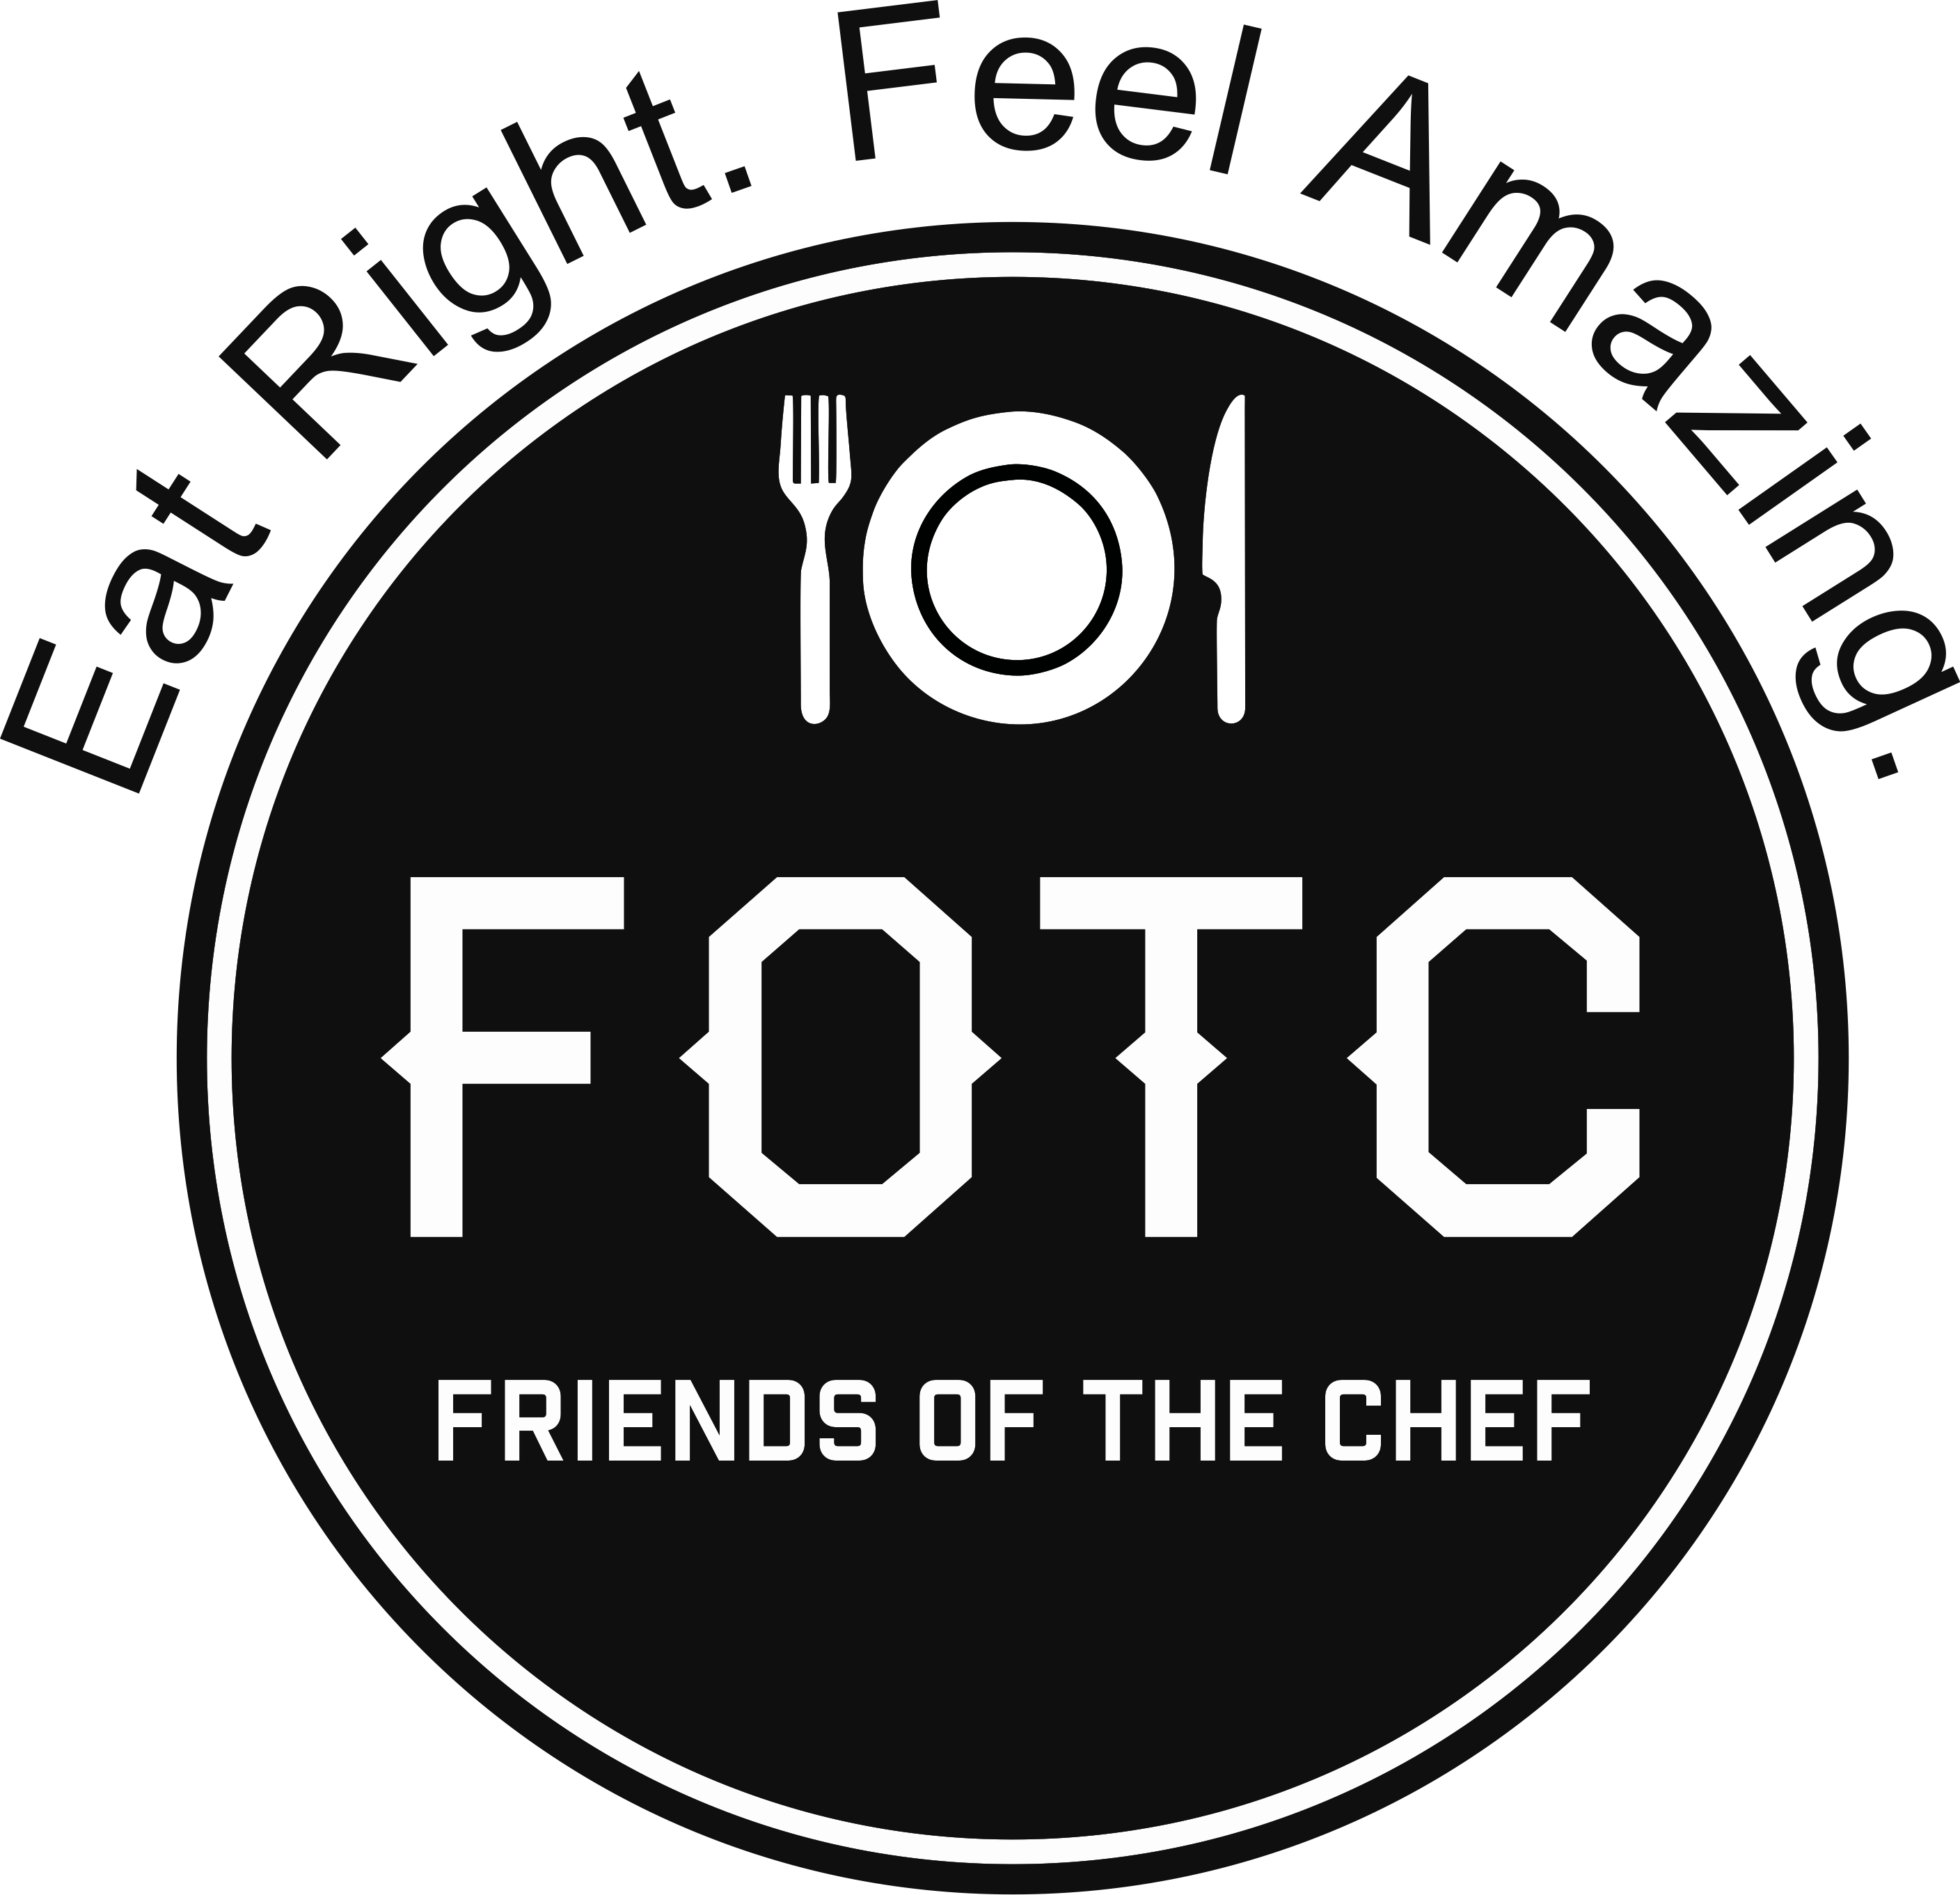 Friends of the Chef